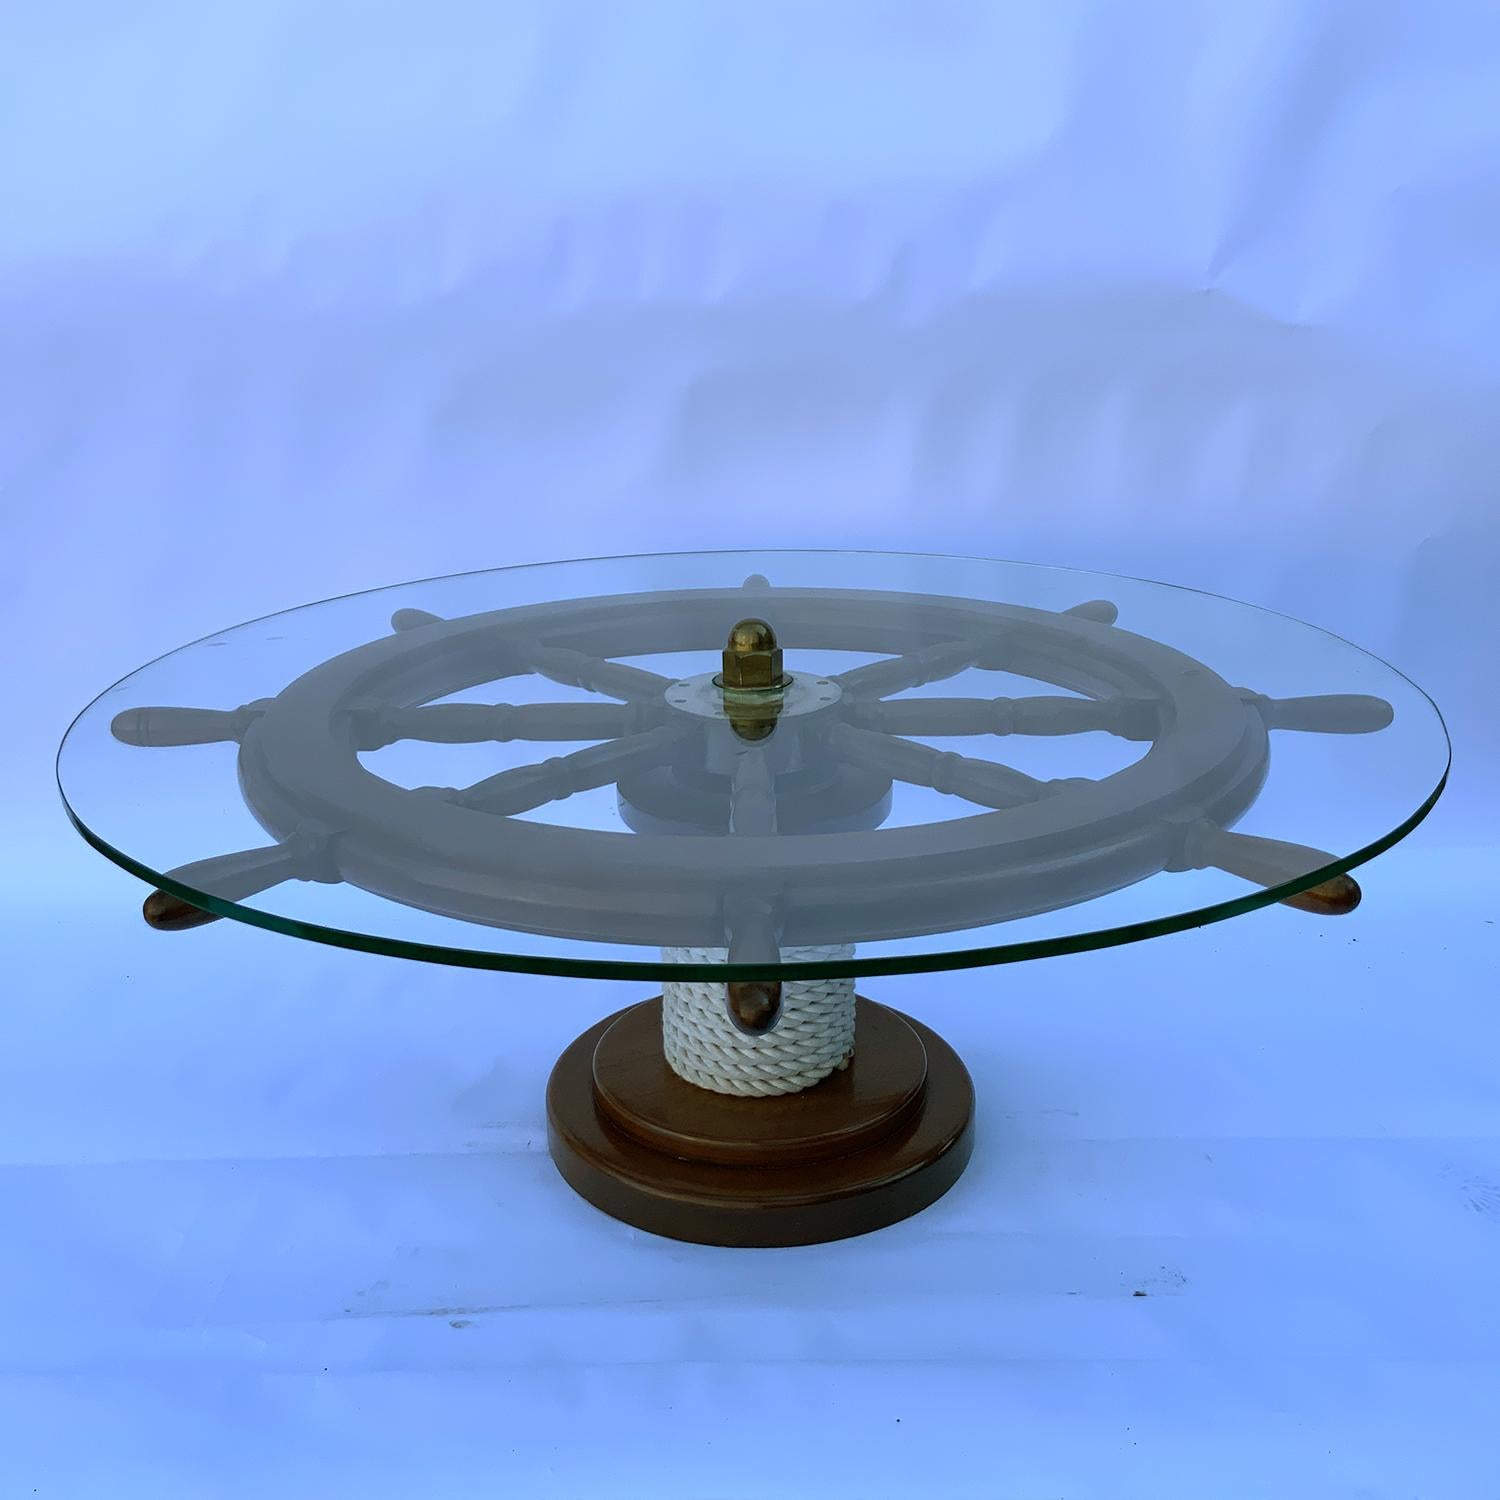 Genuine mahogany ship's wheel with a brass hub. Varnished finish. Mounted to a rope bound circular base. Plate glass top with brass nut cap. This is a professionally built wheel suitable for use on any vessel today. Sturdy brass hub with ten merging